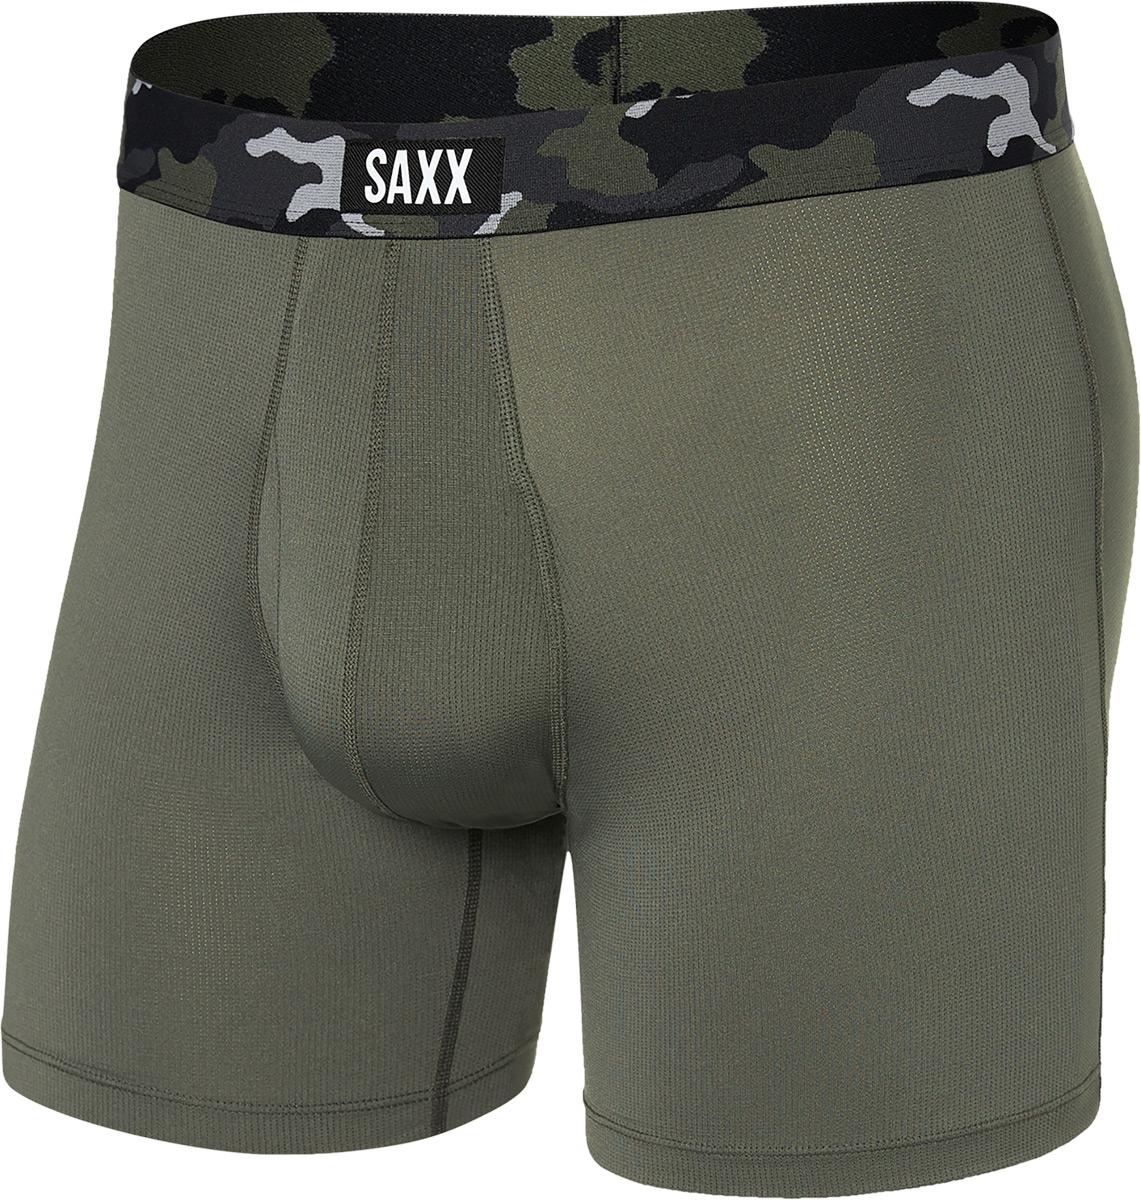 Saxx Sport Mesh Boxer Brief Fly - Dusty Olive/camo Wb